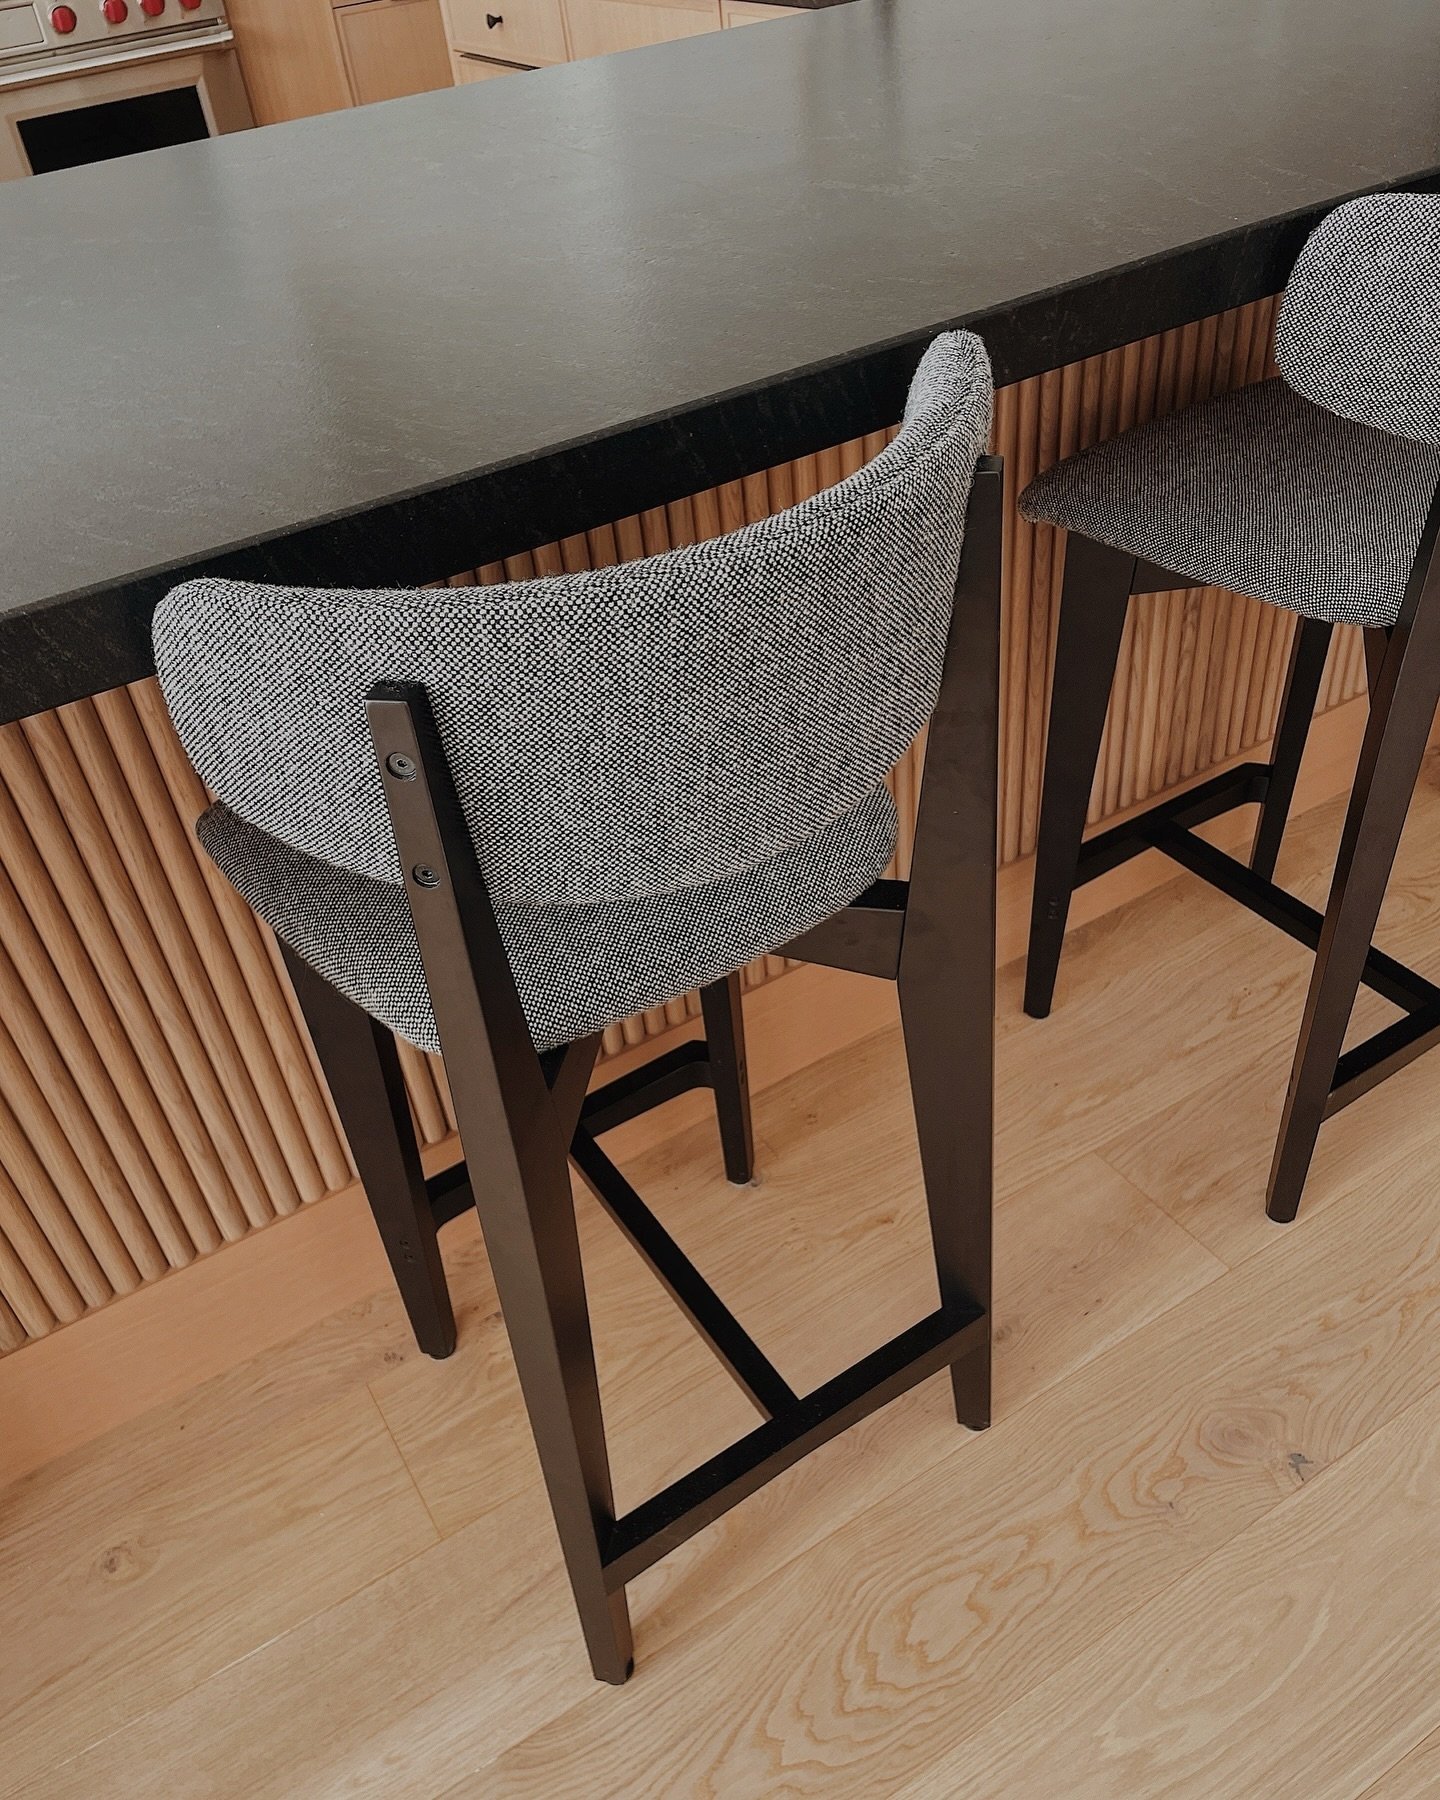 Crate and Barrel is great and all, but why source retail when we have thousands of trade-only furniture + decor vendors to pick from? 

These stools (and matching dining chairs) were sourced through one of our favourite Canadian furniture companies, 